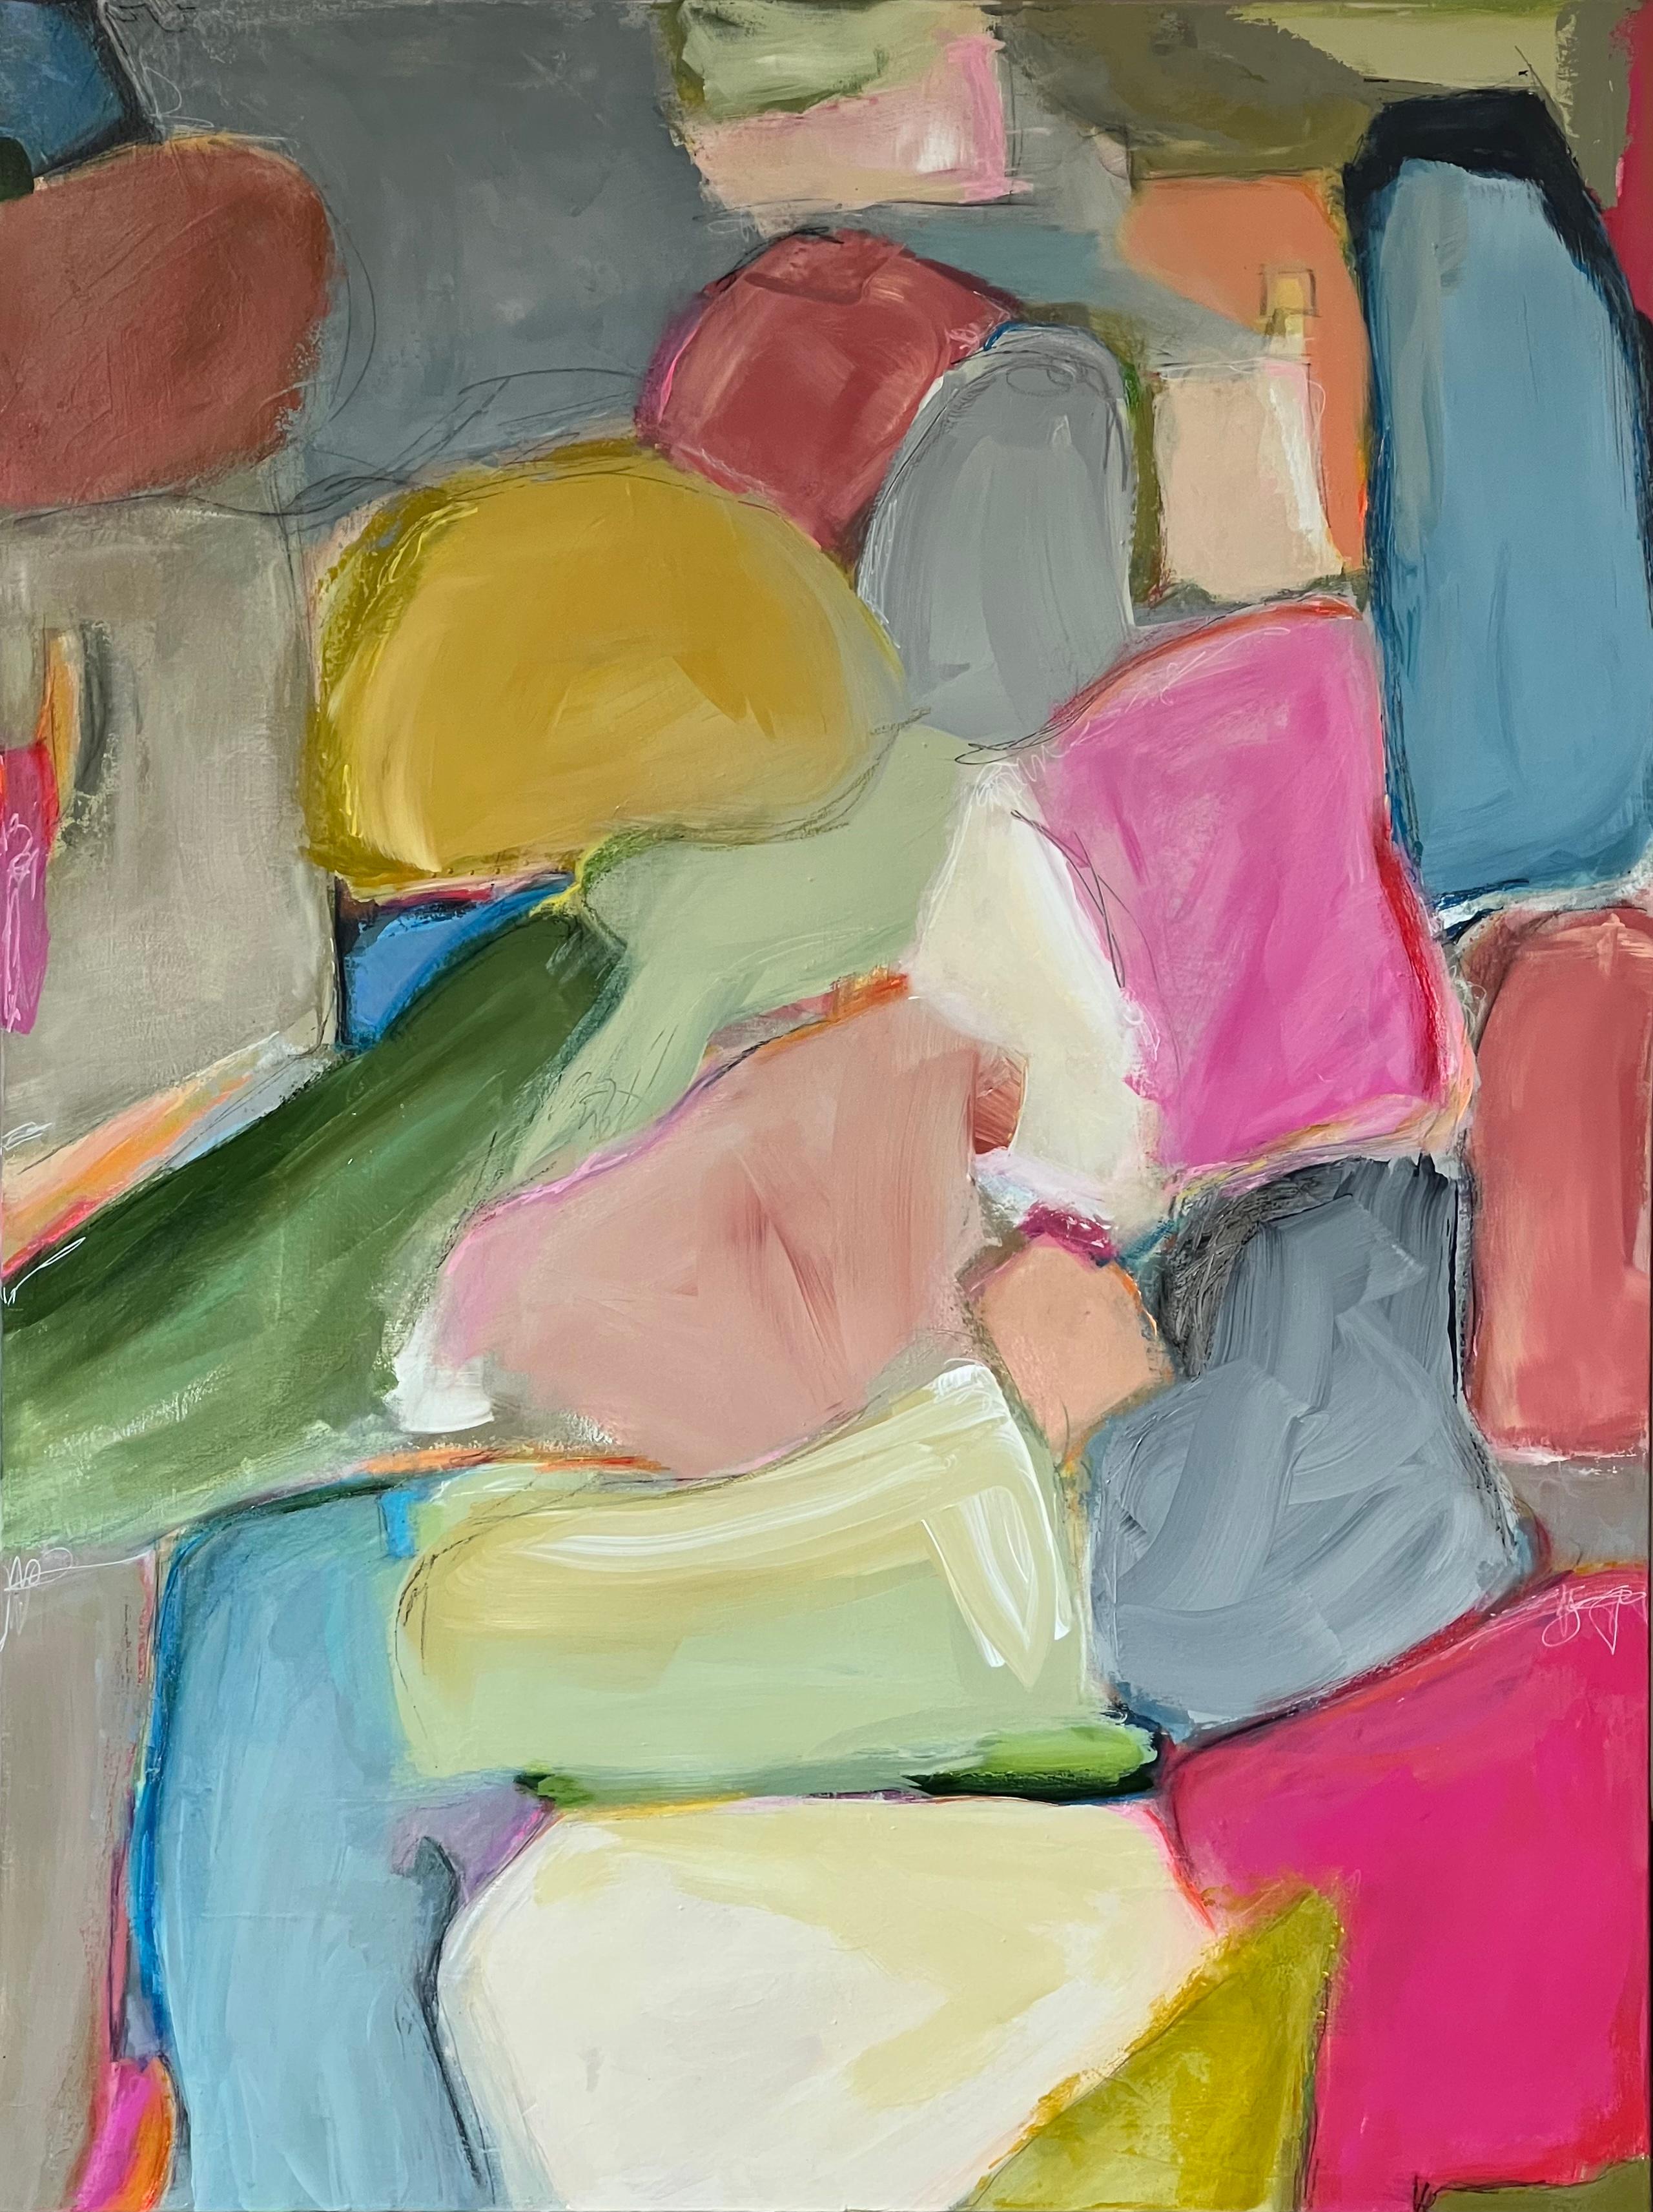 Dreaming About You (Abstract, Blues, Green, Gold, Yellow, Pink) - Painting by Kelley Carman